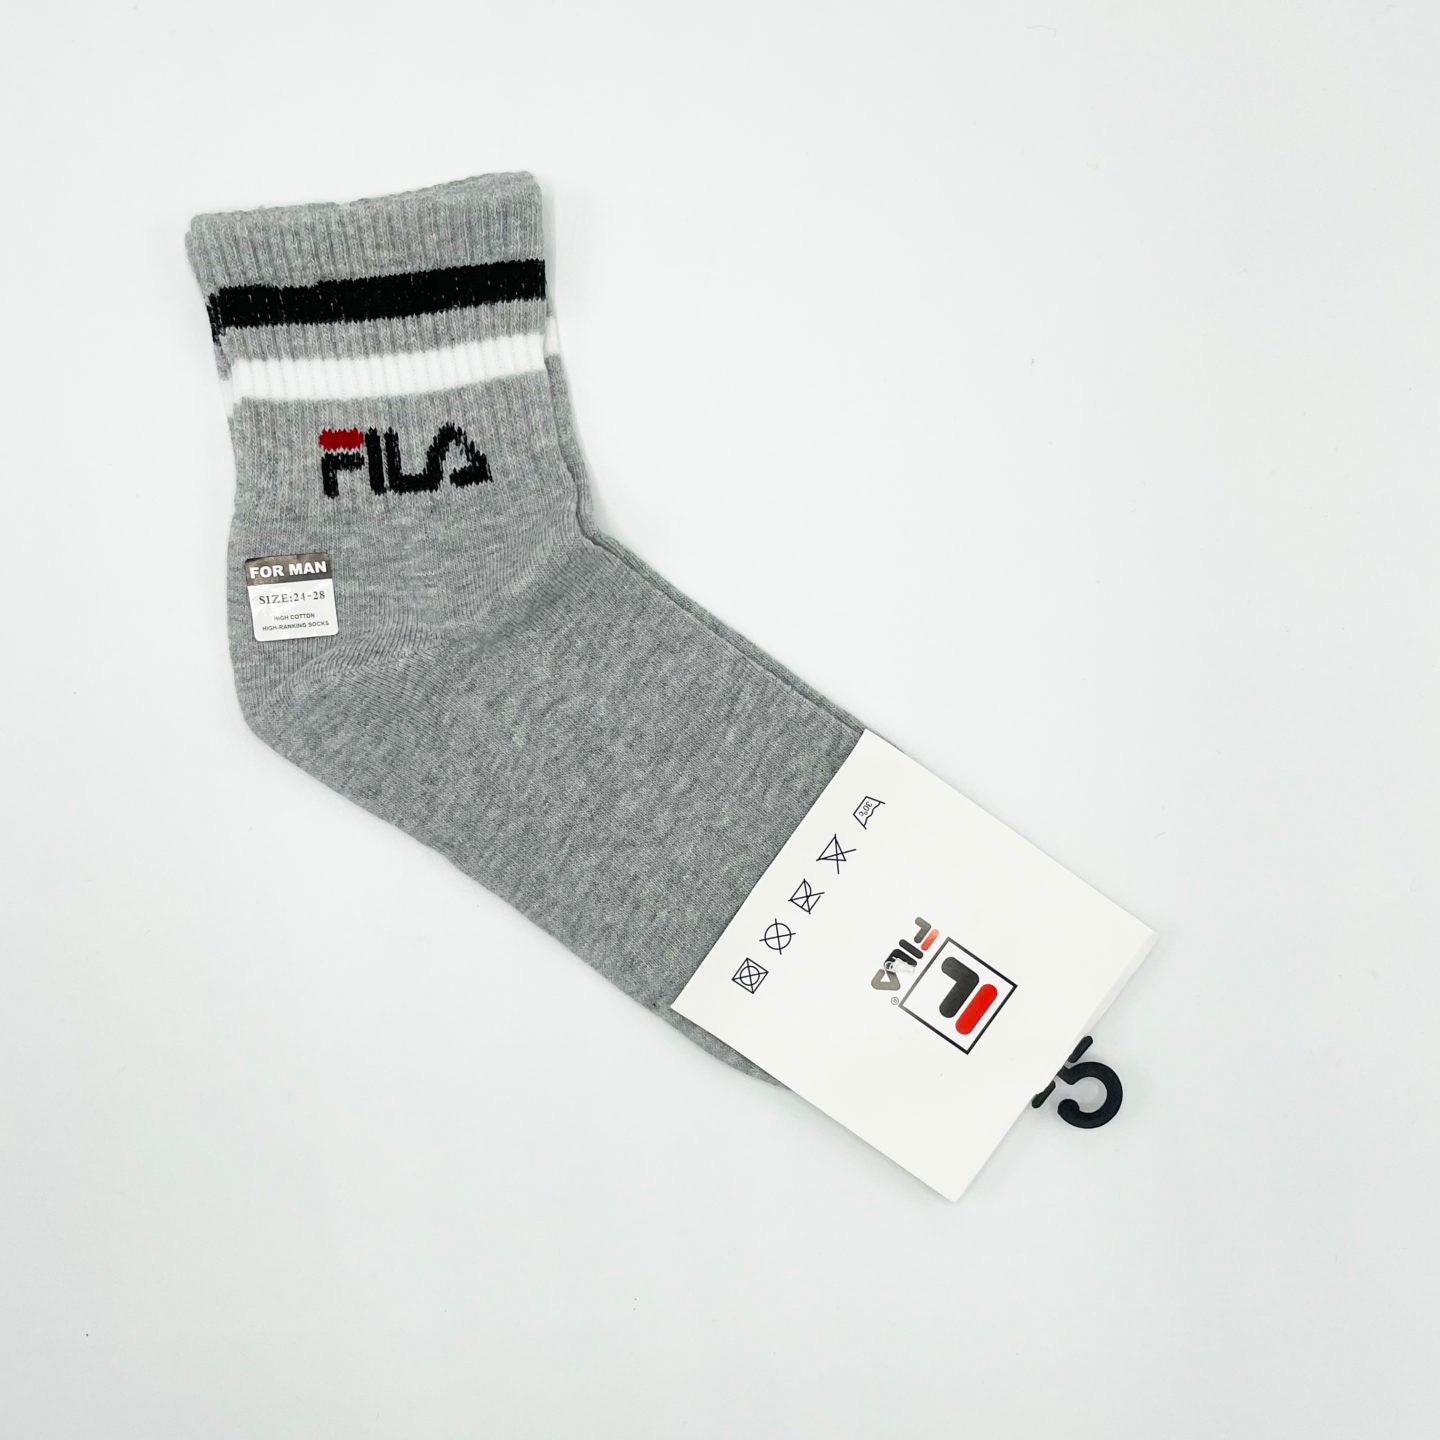 FILA Ankles 100% combed cotton pack of 3